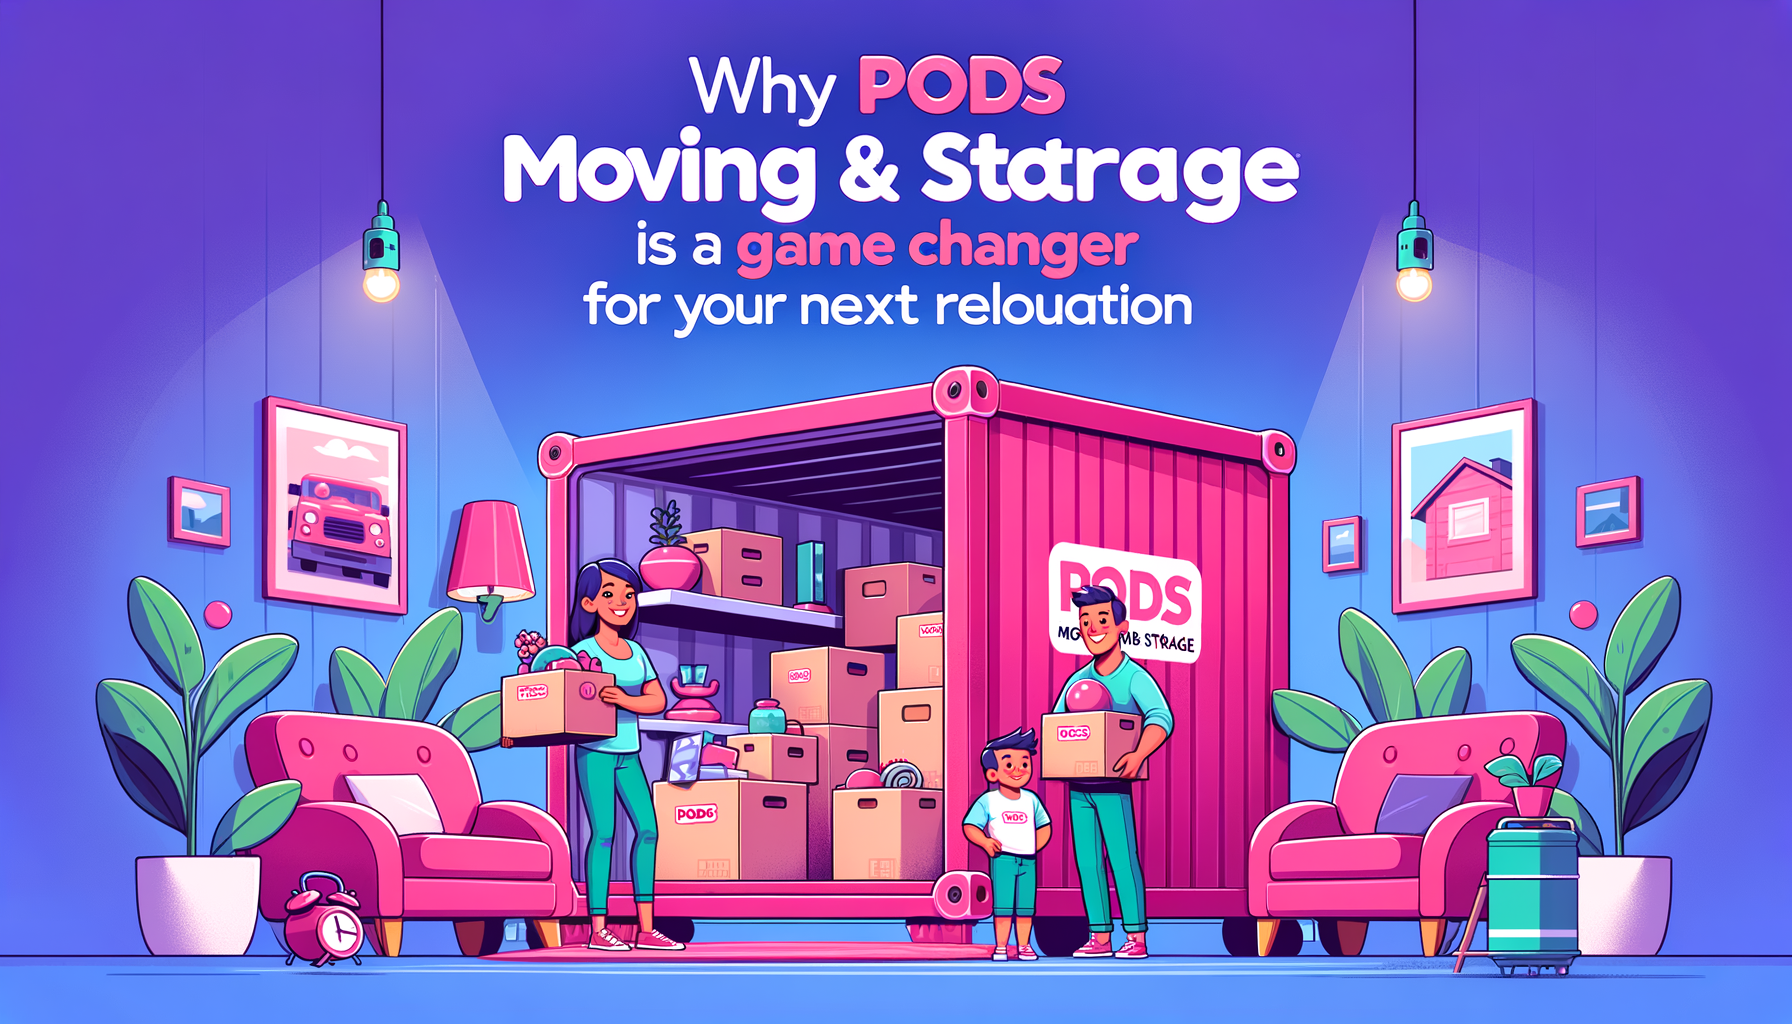 Cartoon-like illustration of a fuschia-colored PODS moving and storage container with characters happily packing, symbolizing an easy relocation process.